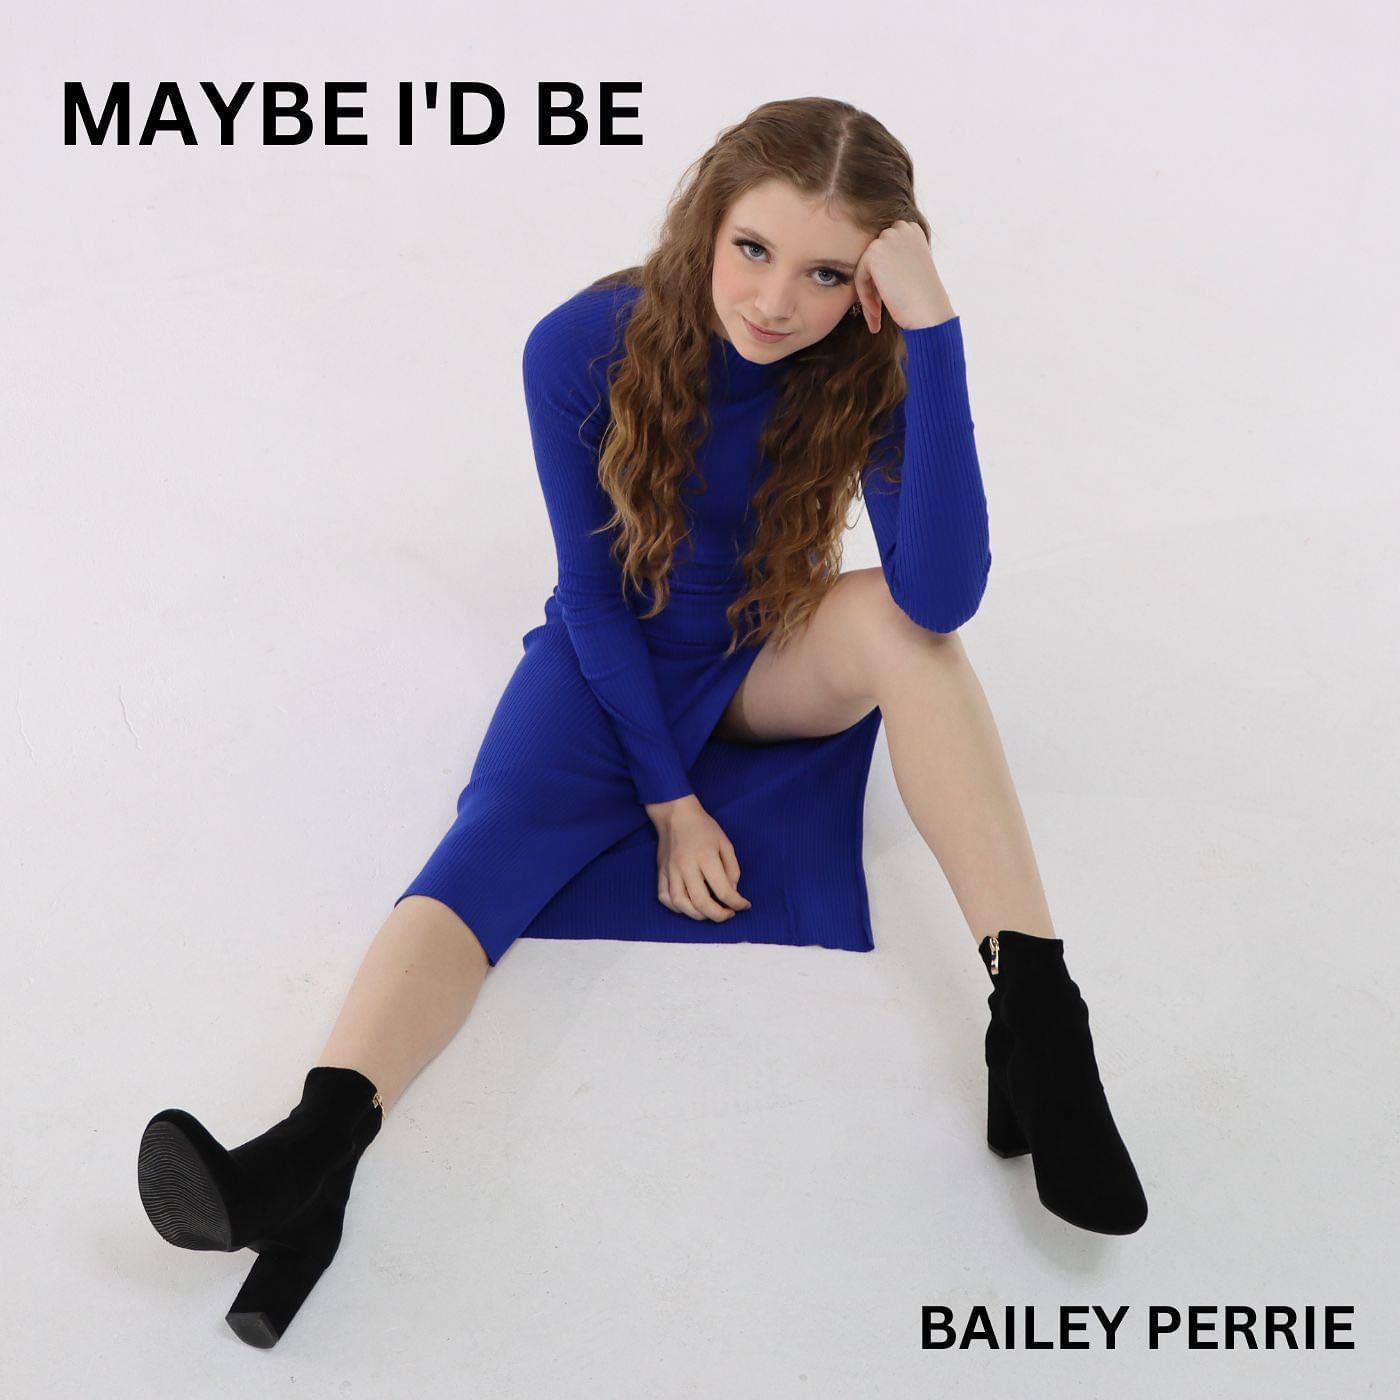 Art for Maybe I'd Be by Bailey Perrie